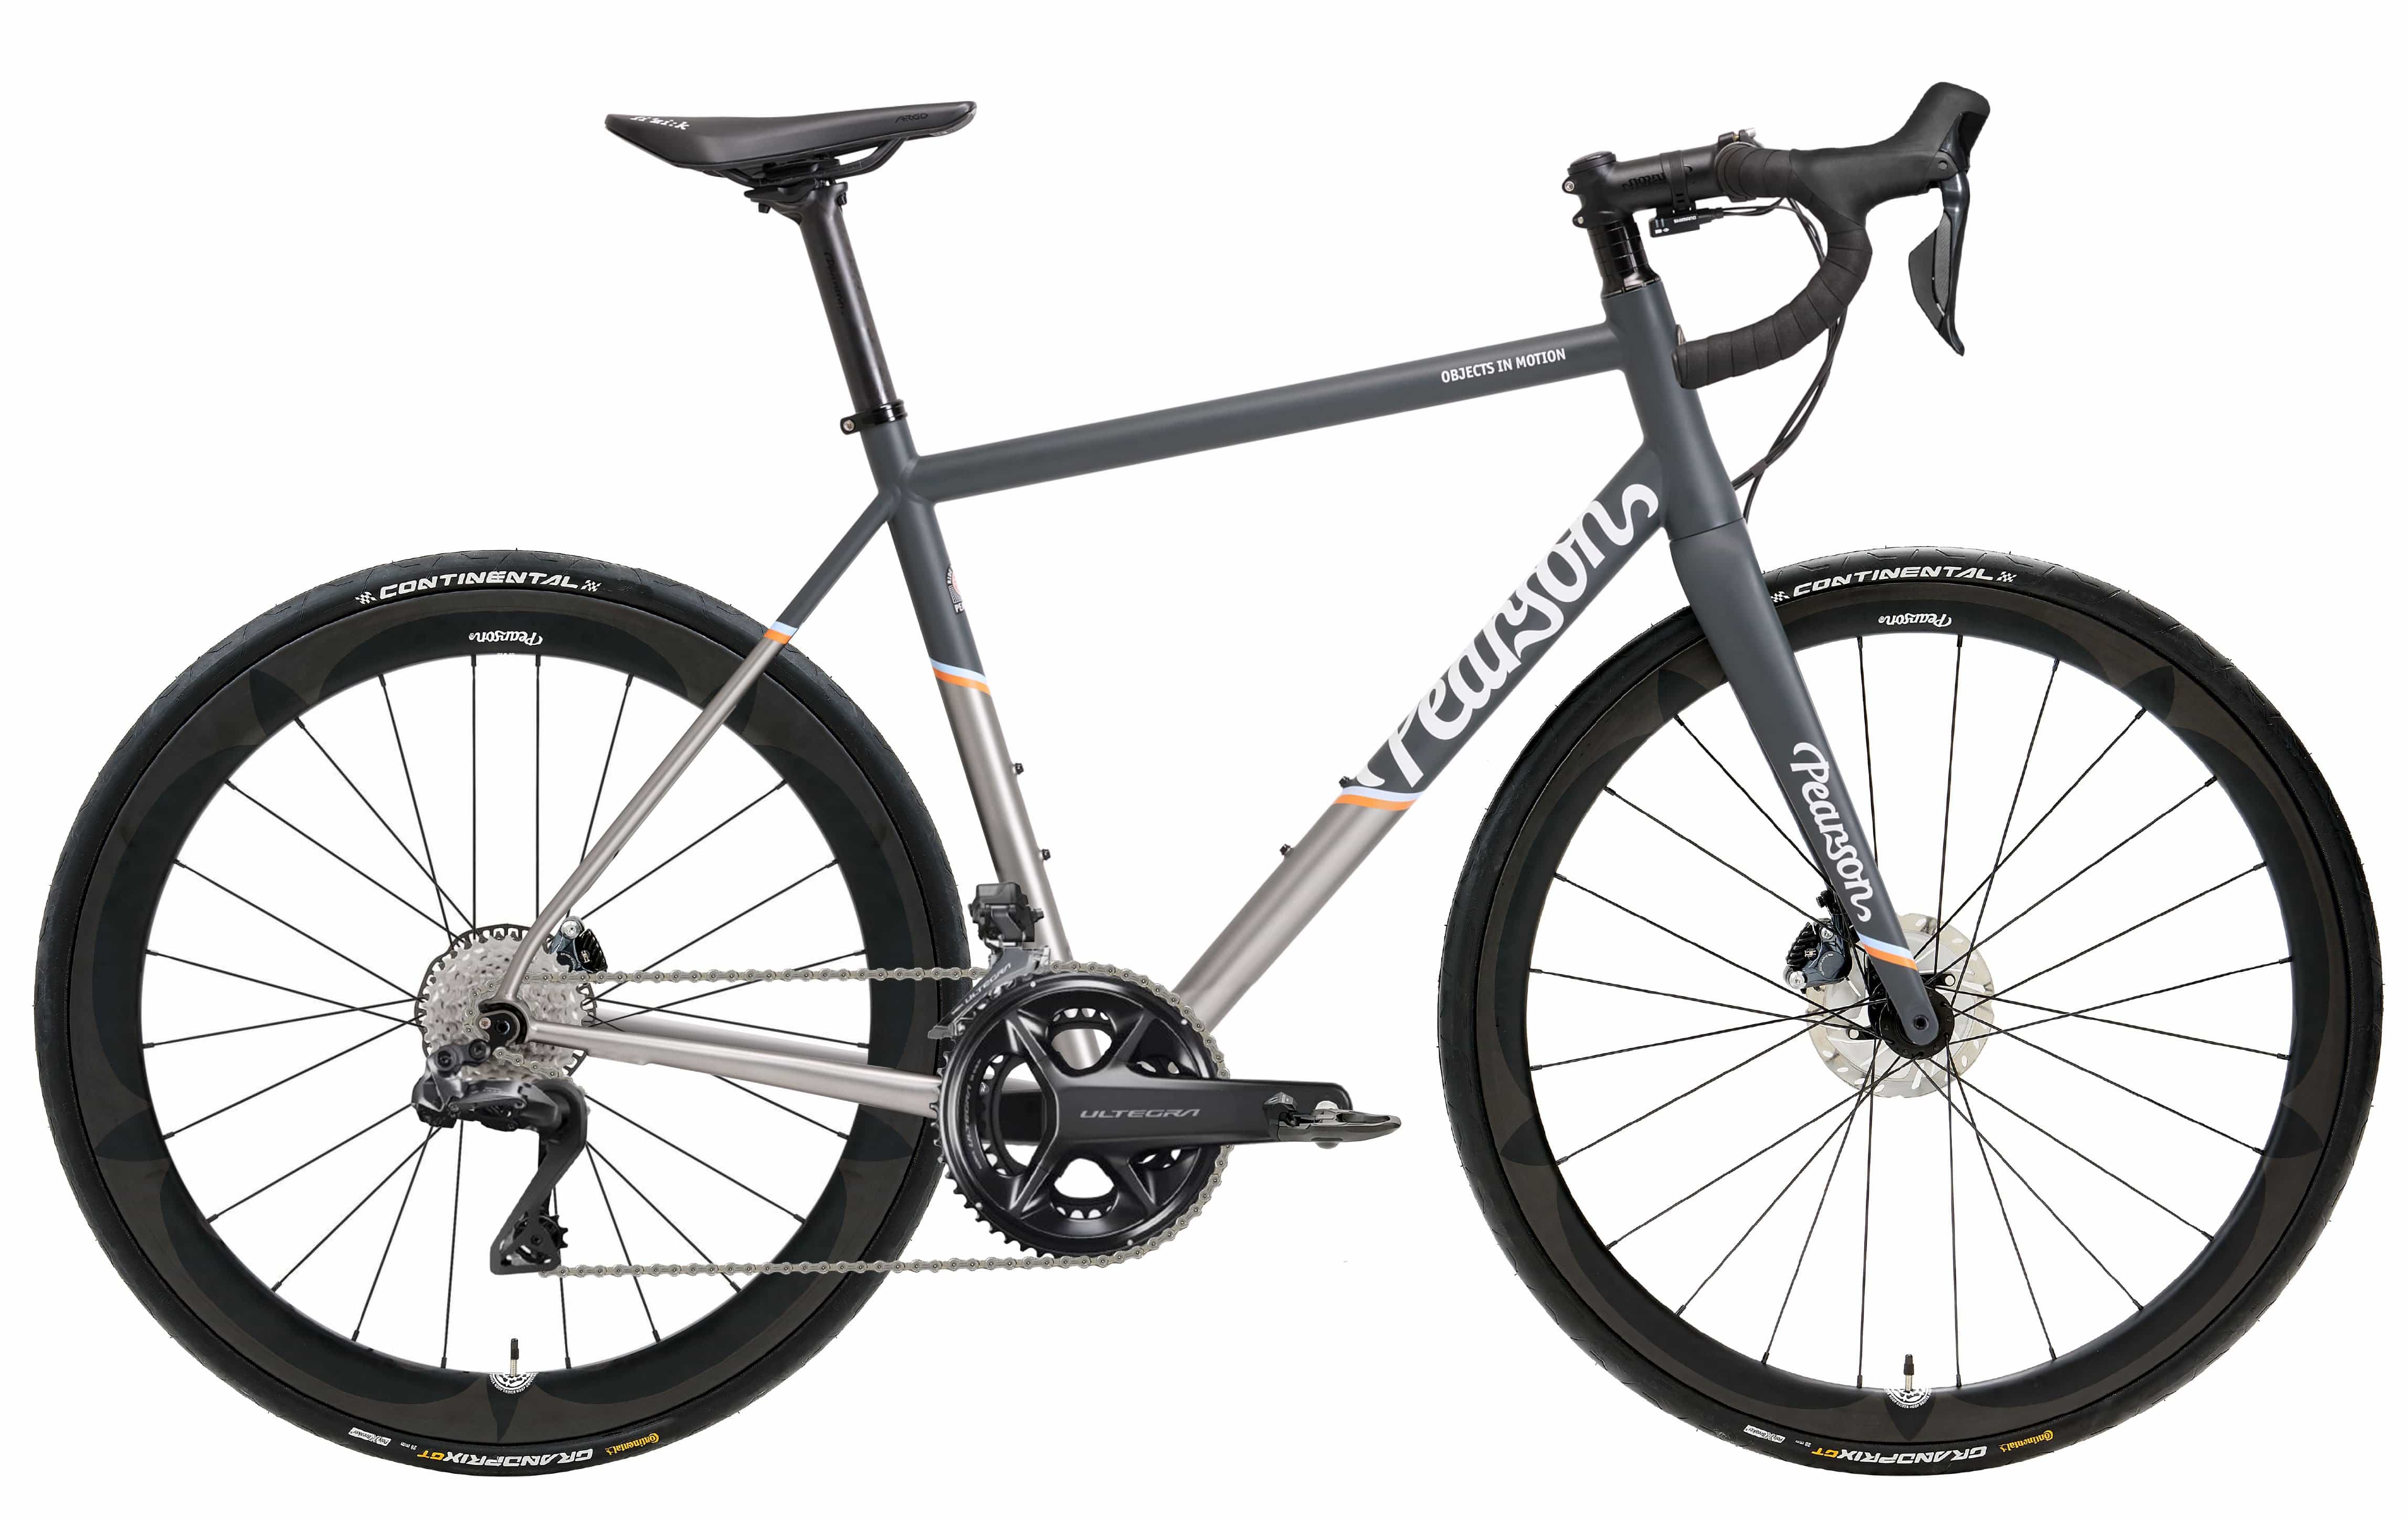 Pcs  Objects In Motion - Titanium Road Bike  X-large / Grey / Shimano Ultegra R8170 12 Speed Di2 - Hoopdriver Cut And Thrust Carbon Wheels